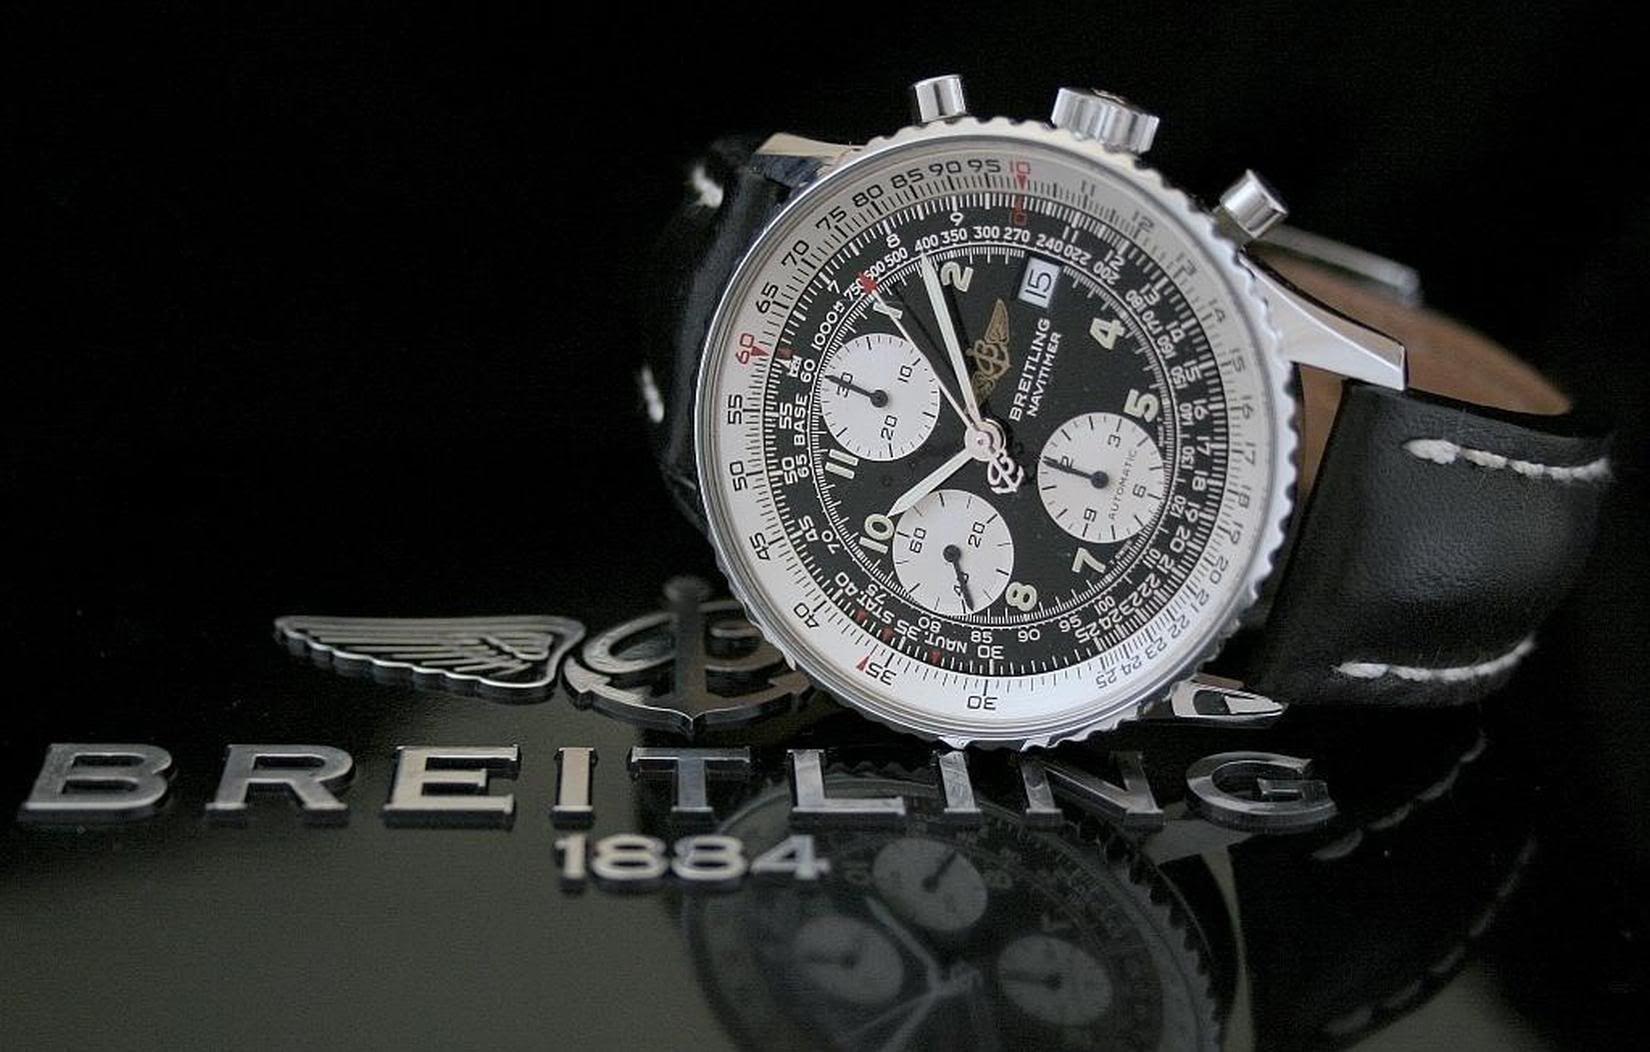 Latecomer Breitling's Bold and Speedy China Expansion | Jing Daily